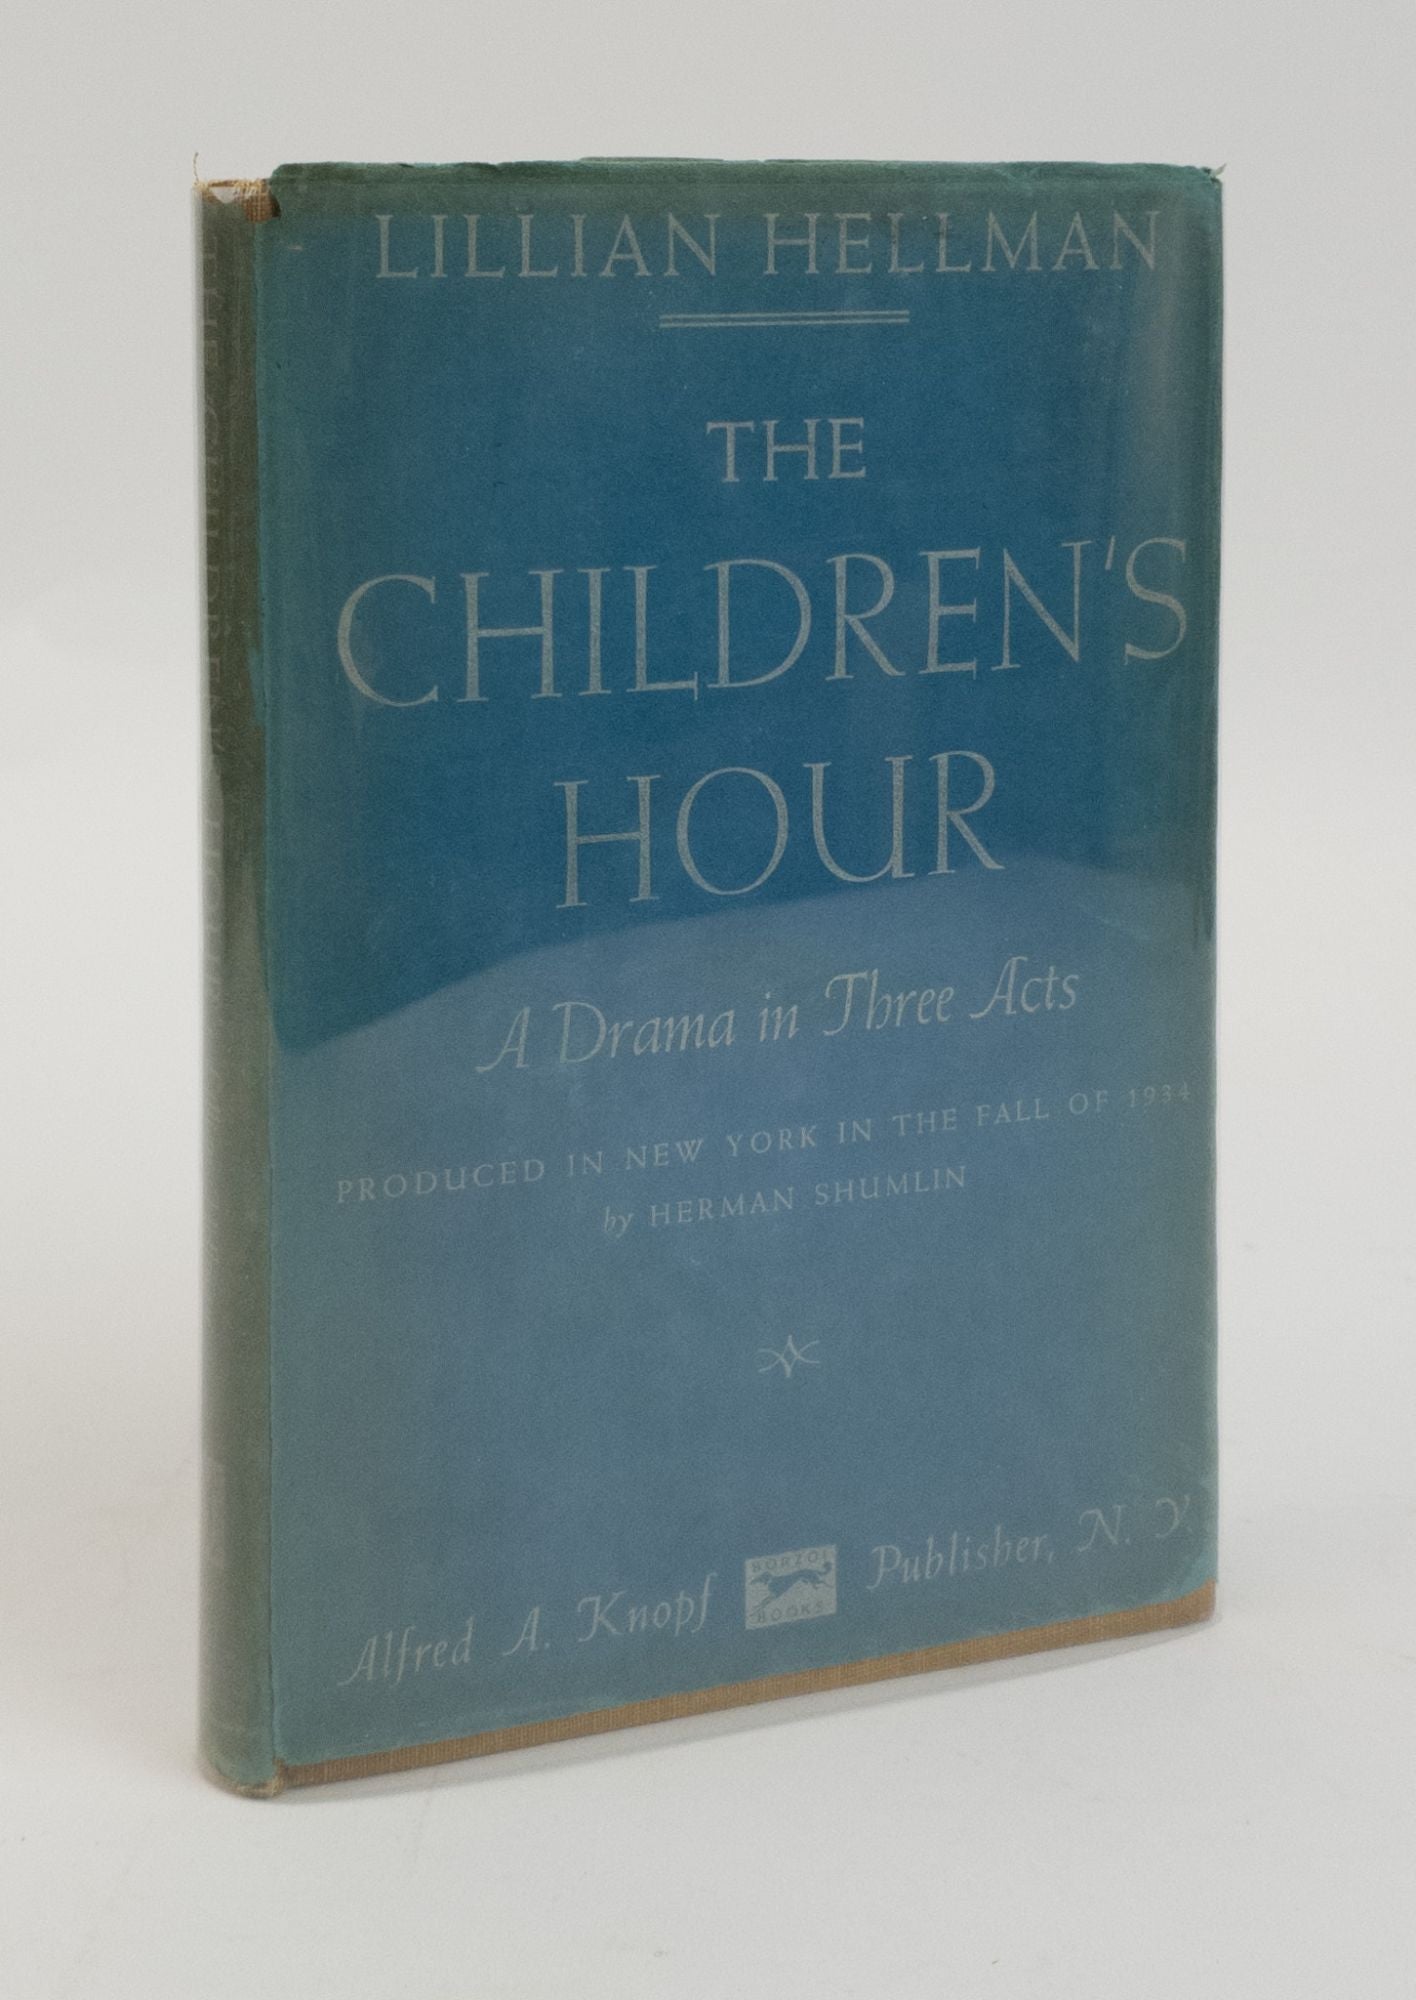 Product Image for THE CHILDREN'S HOUR